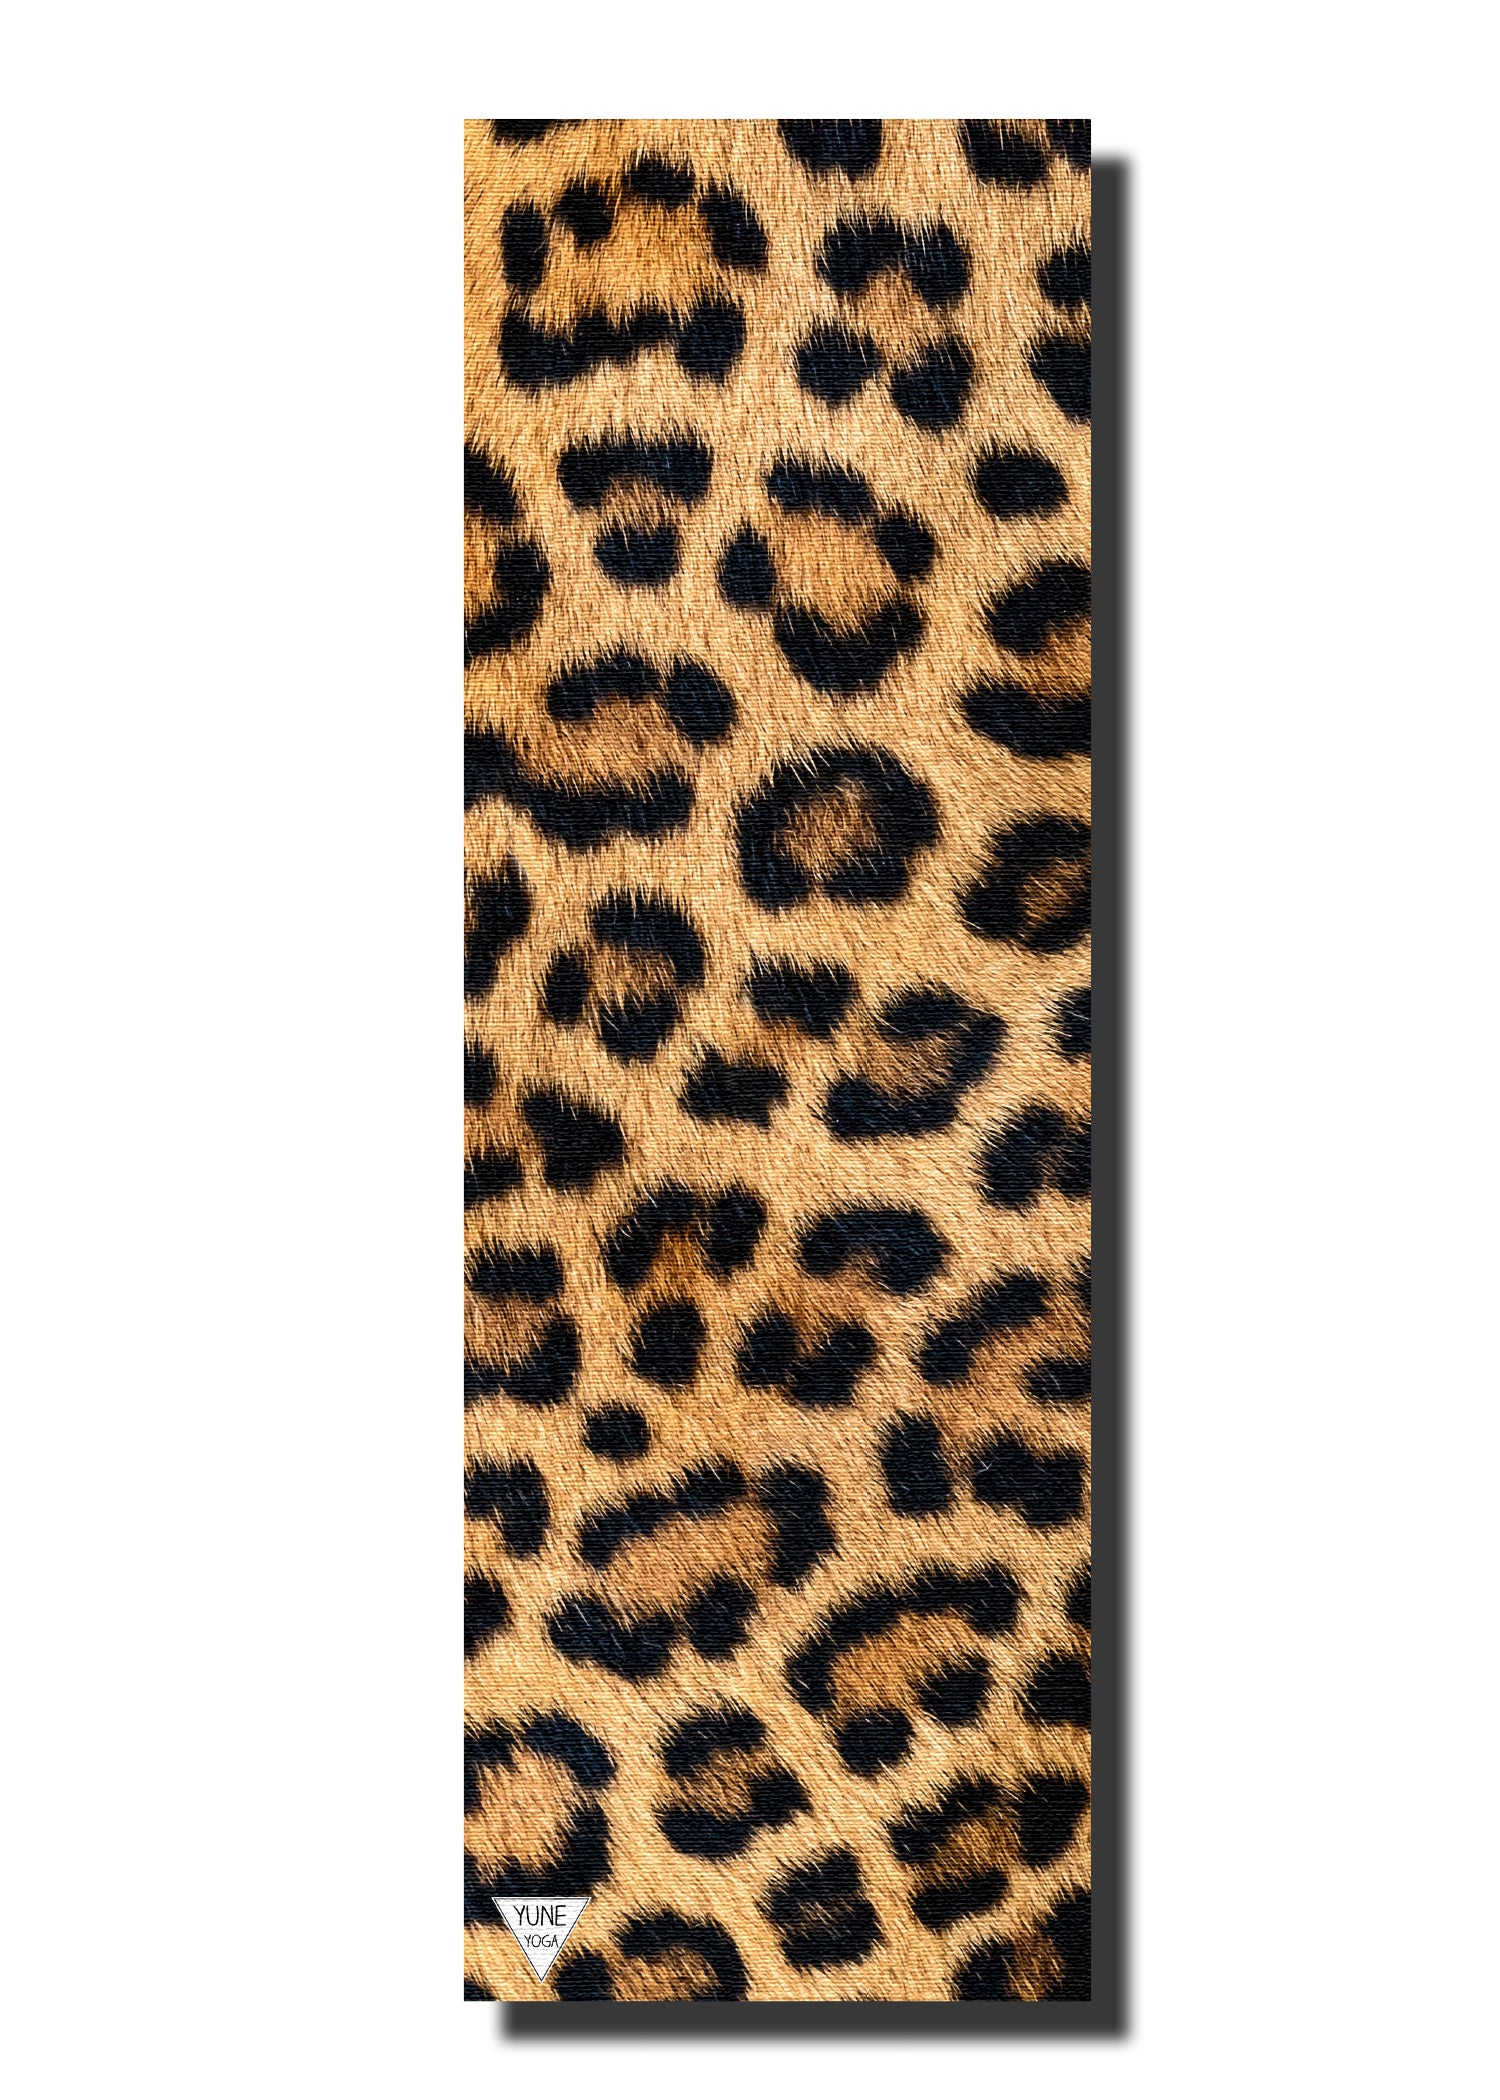 Leopard Pattern Design Yoga Mat for Exercise, Yoga, and Pilates All-Purpose  High Density Anti-Tear : Sports & Outdoors 